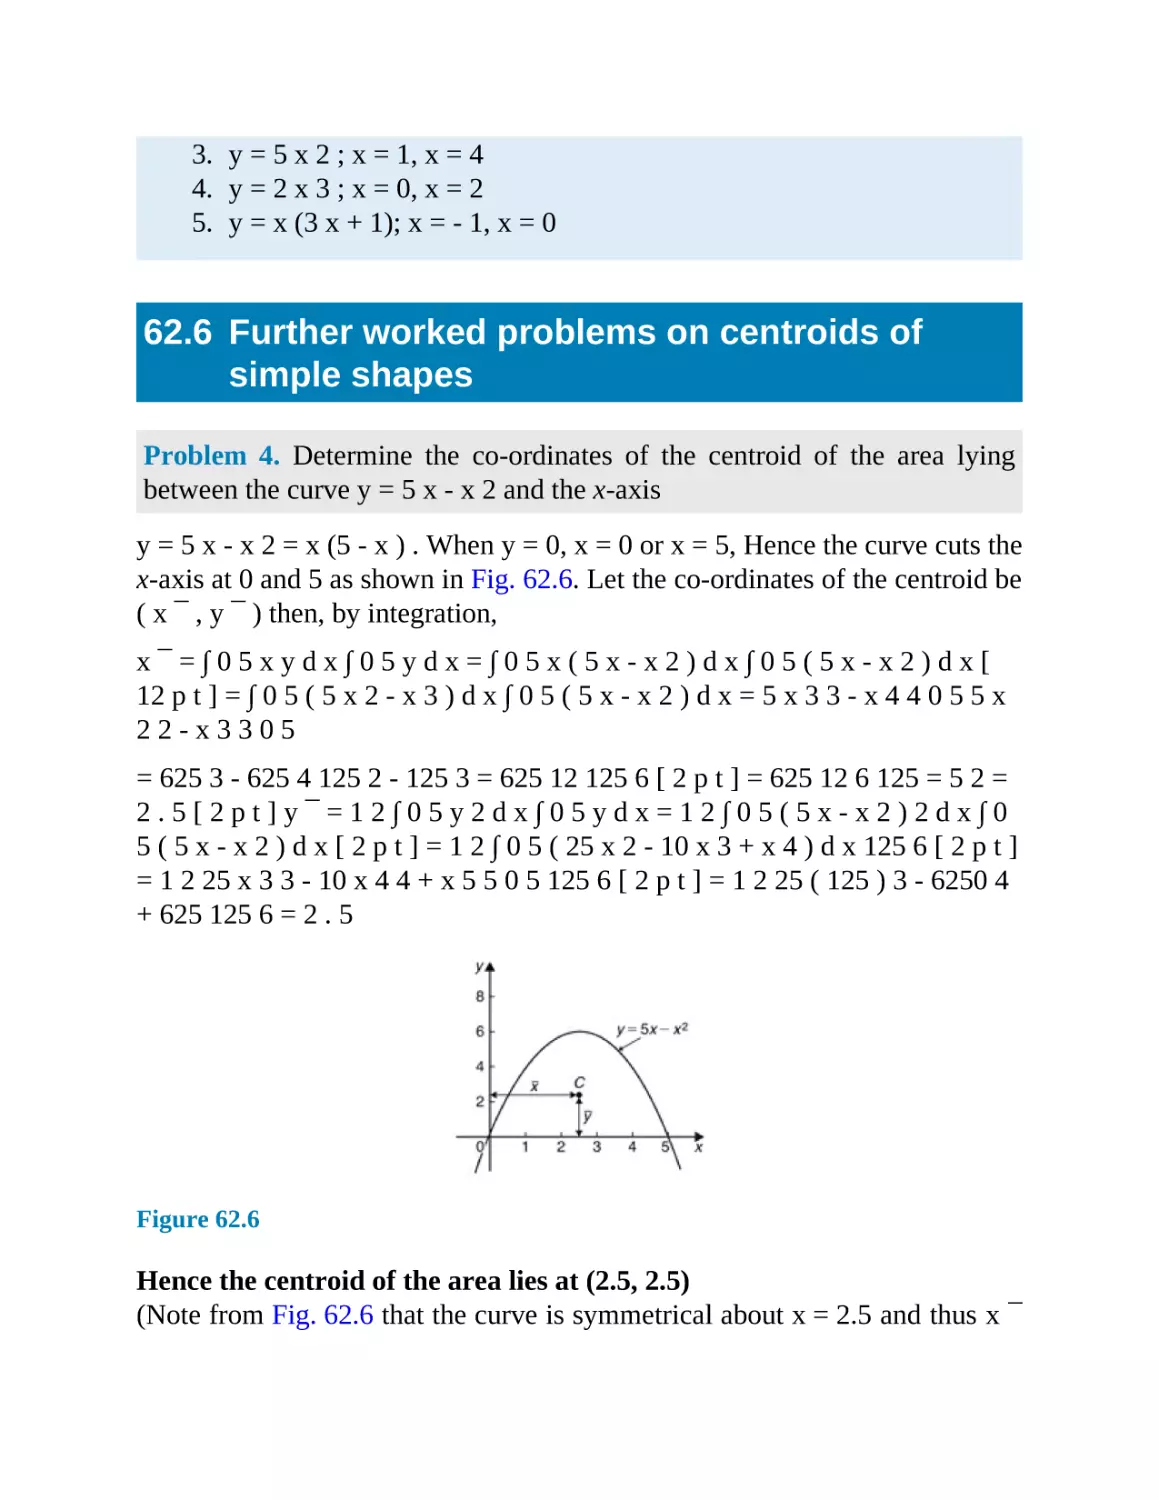 62.6 Further worked problems on centroids of simple shapes